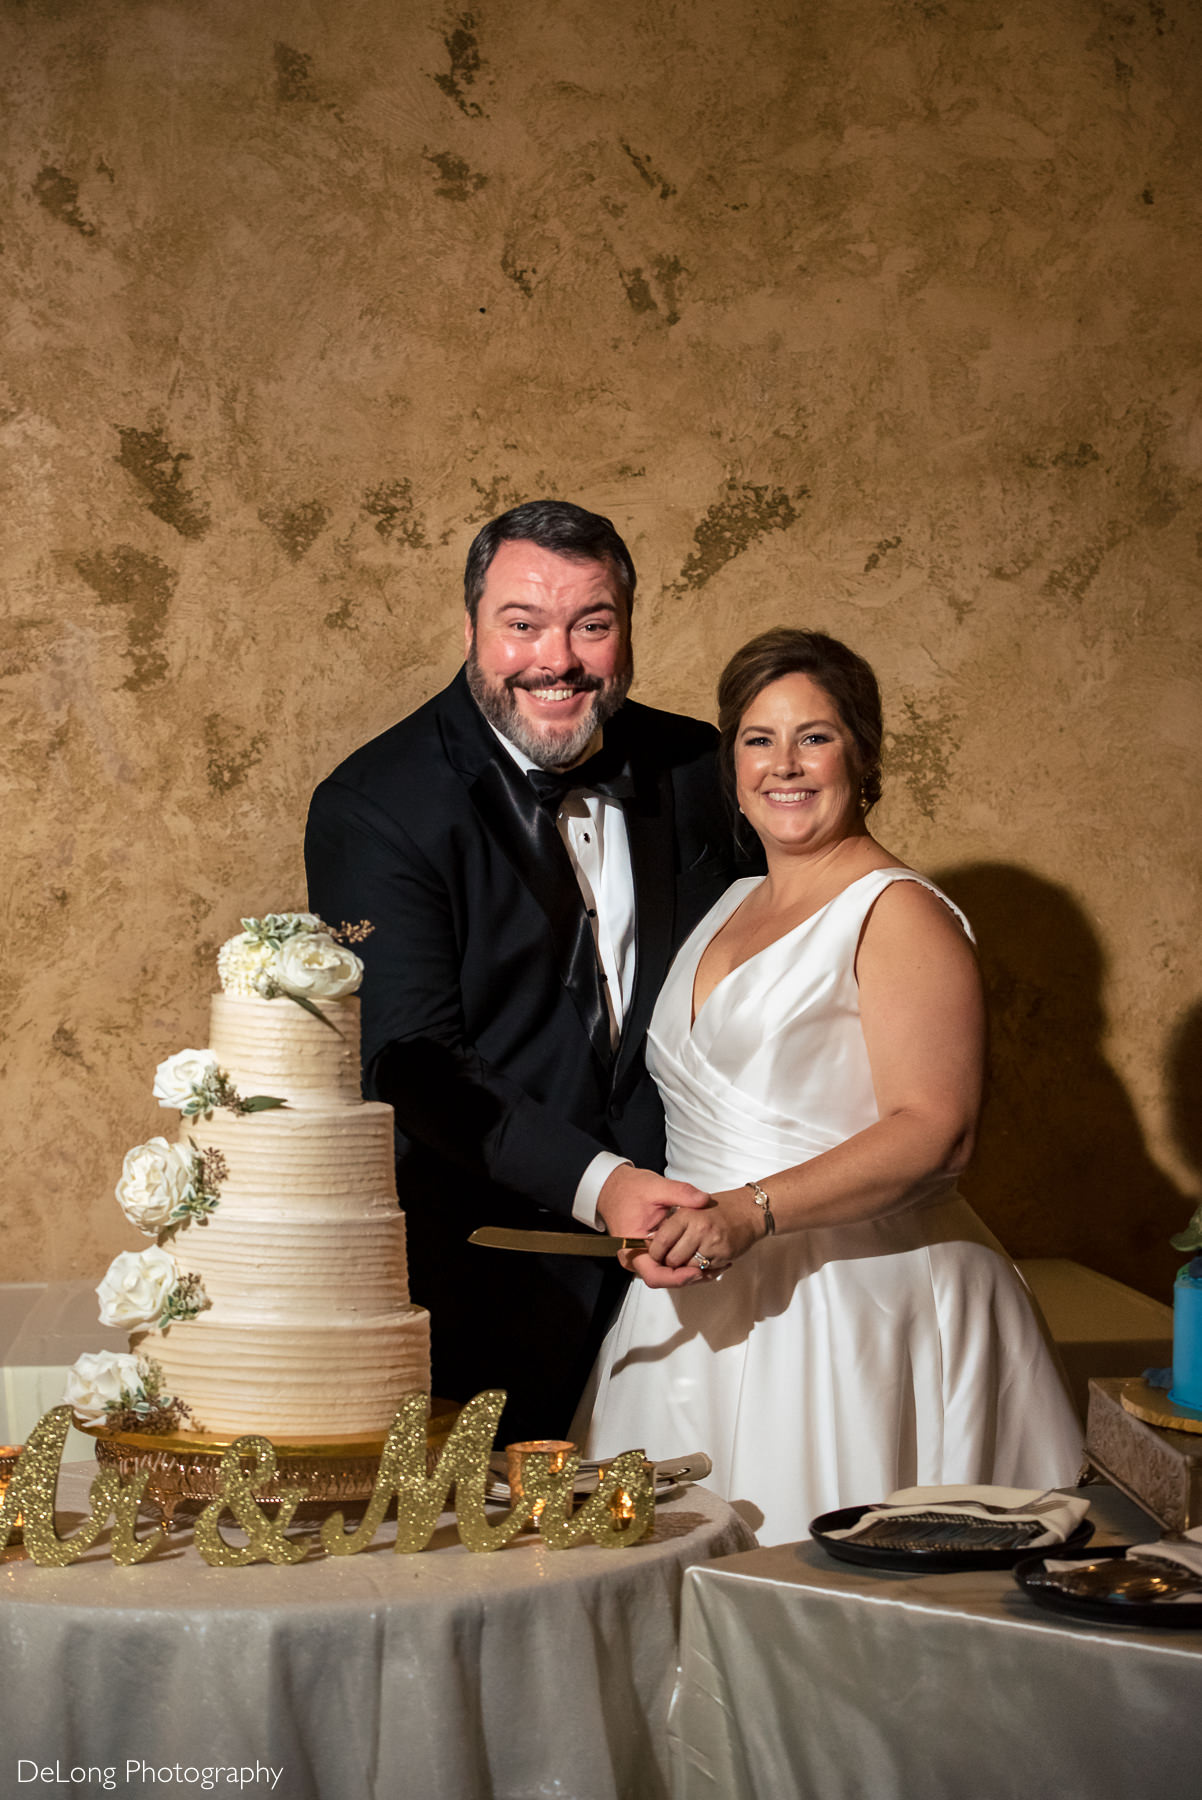 Bride and groom cutting wedding cake at The Club at Longview by Charlotte Wedding Photographers DeLong Photography